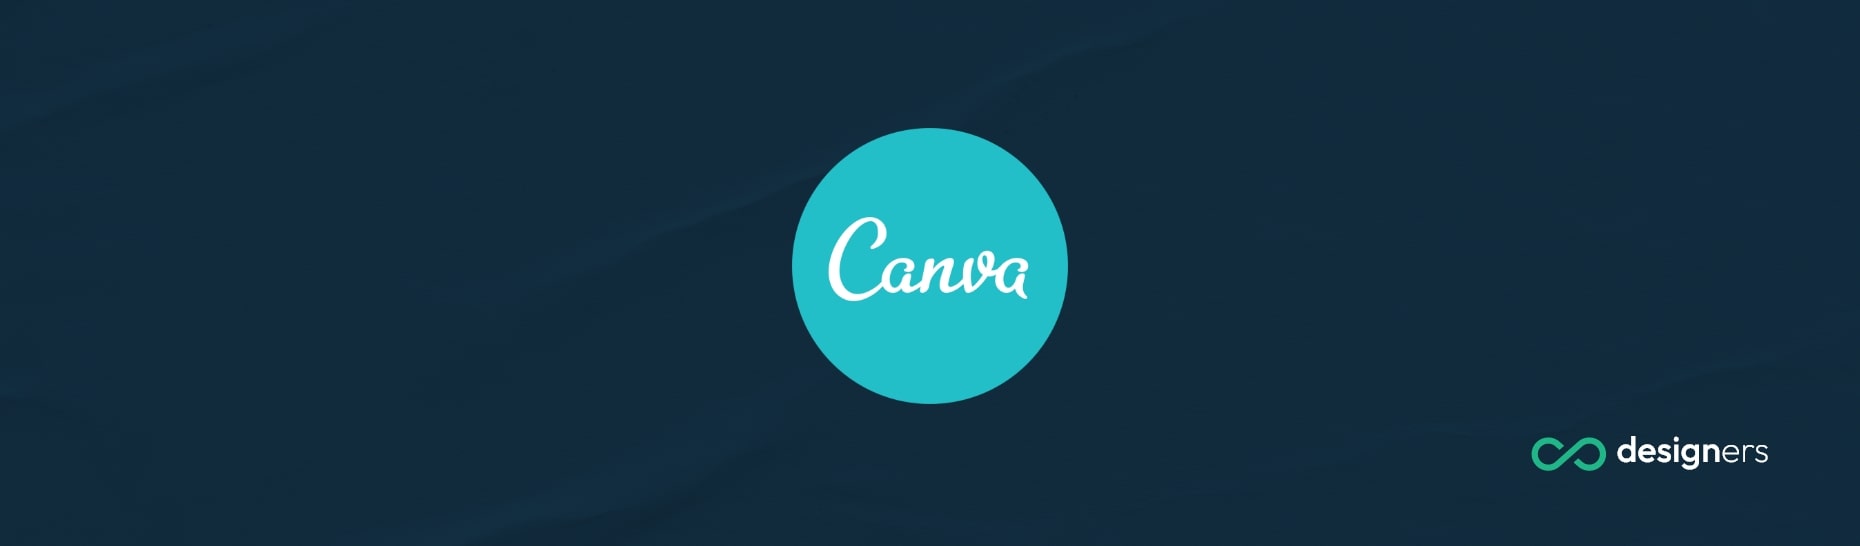 How Do I Get Certified in Canva?